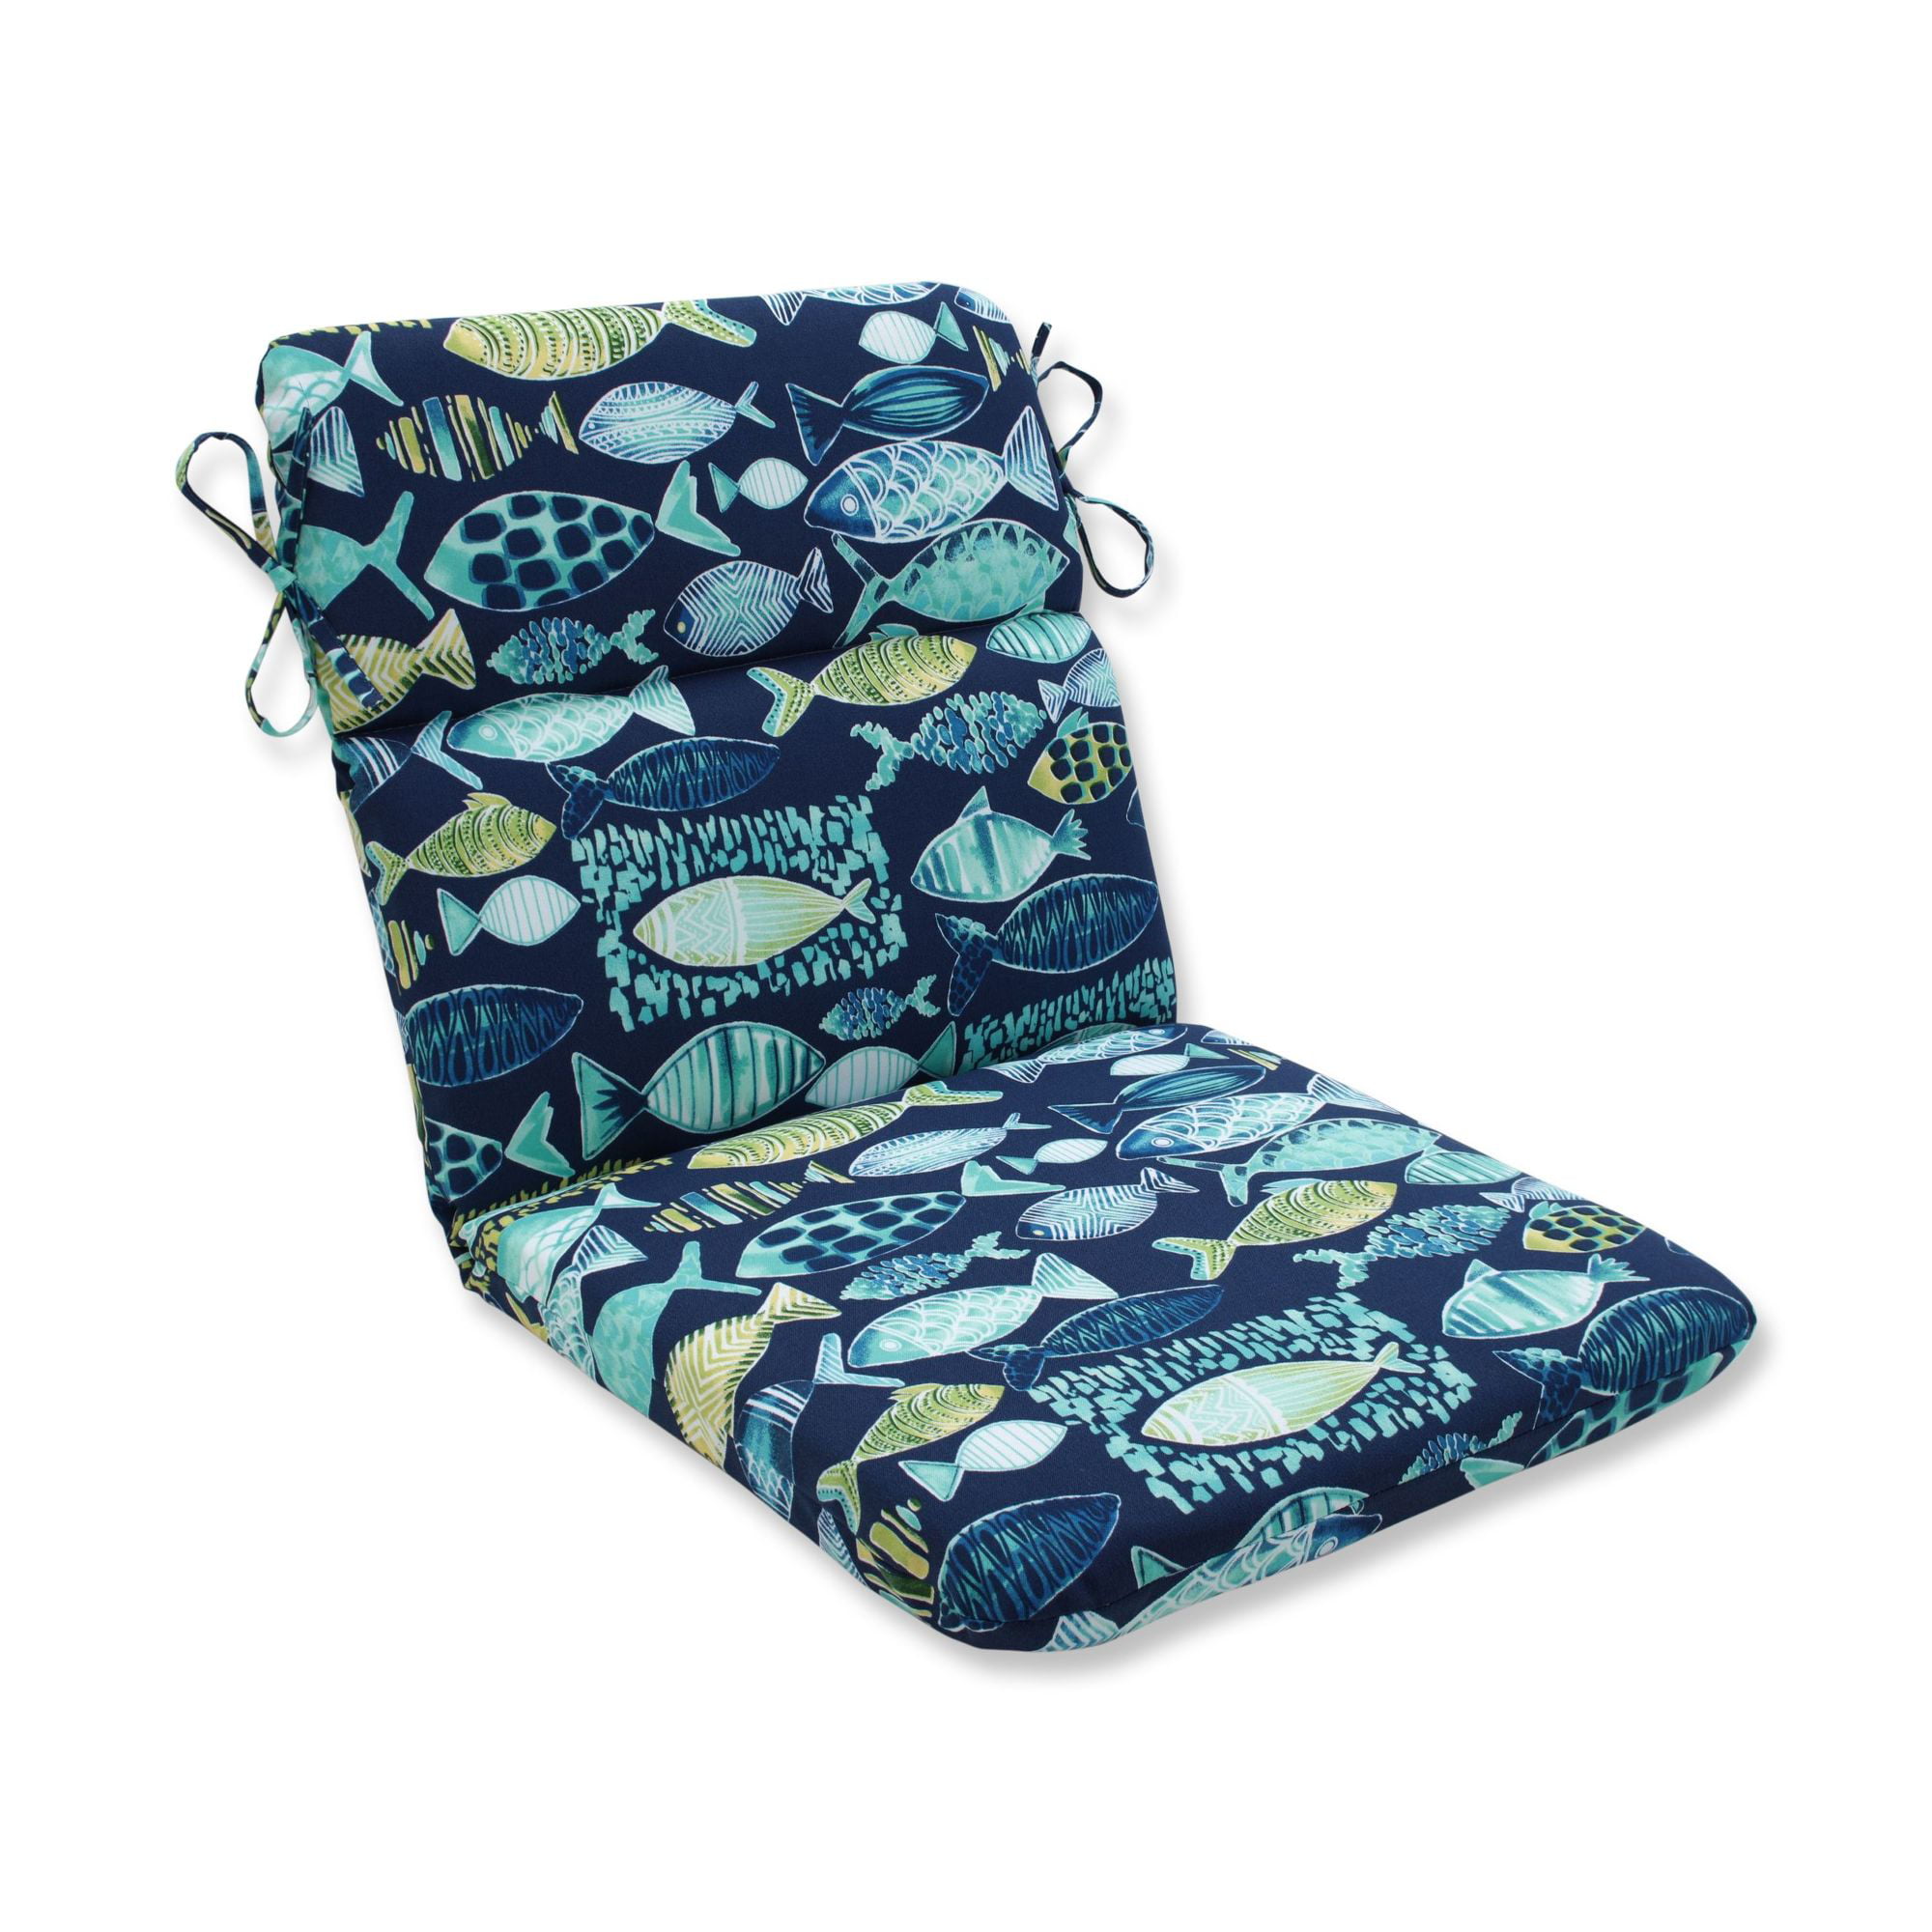 40 5 Aqua Blue And Green Nautical Outdoor Patio Rounded Chair Cushion